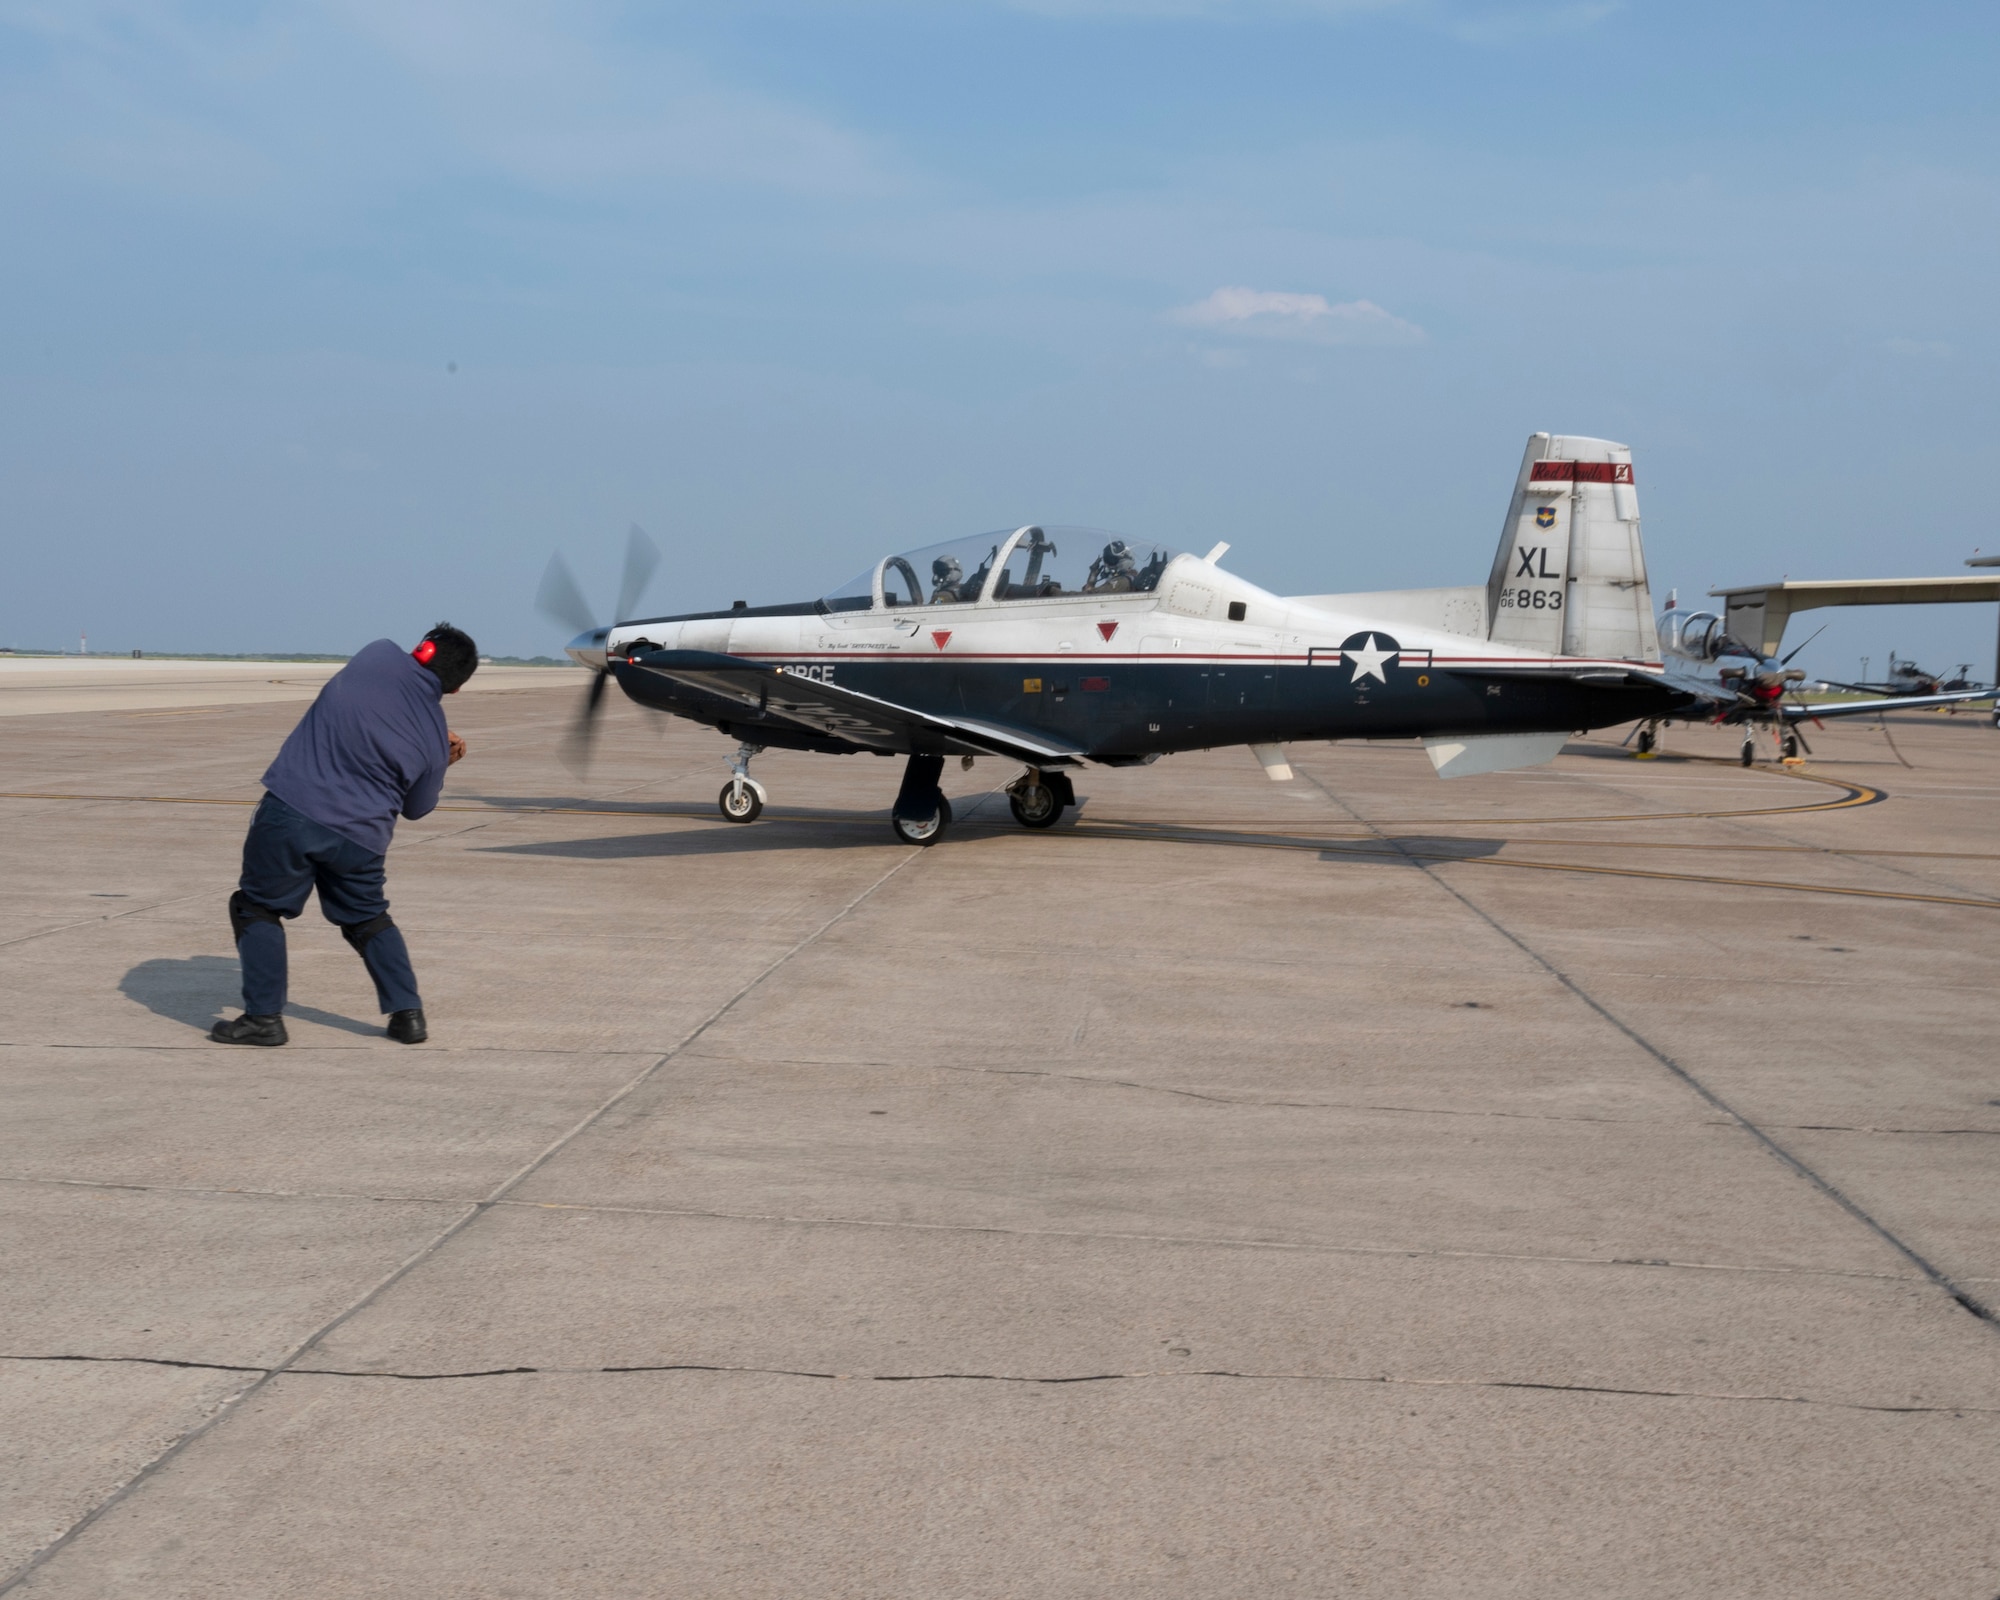 A Ground Crew member at Laughlin Air Force Base, Texas, waves through a T-6 Texan II with U.S. Air Force 2nd Lt. Christopher Ugale, a student pilot with the 47th Student Squadron Squadron and U.S. Air Force Capt. Sarah Fotsch in the pilot and co-pilot seats for 2nd Lt. Ugale’s Dollar Ride on August 4, 2021.  The Dollar Flight is the first flight in a real aircraft for a student pilot and marks a major milestone in the career of a pilot. (U.S. Air Force Photo by Senior Airman Nicholas Larsen)